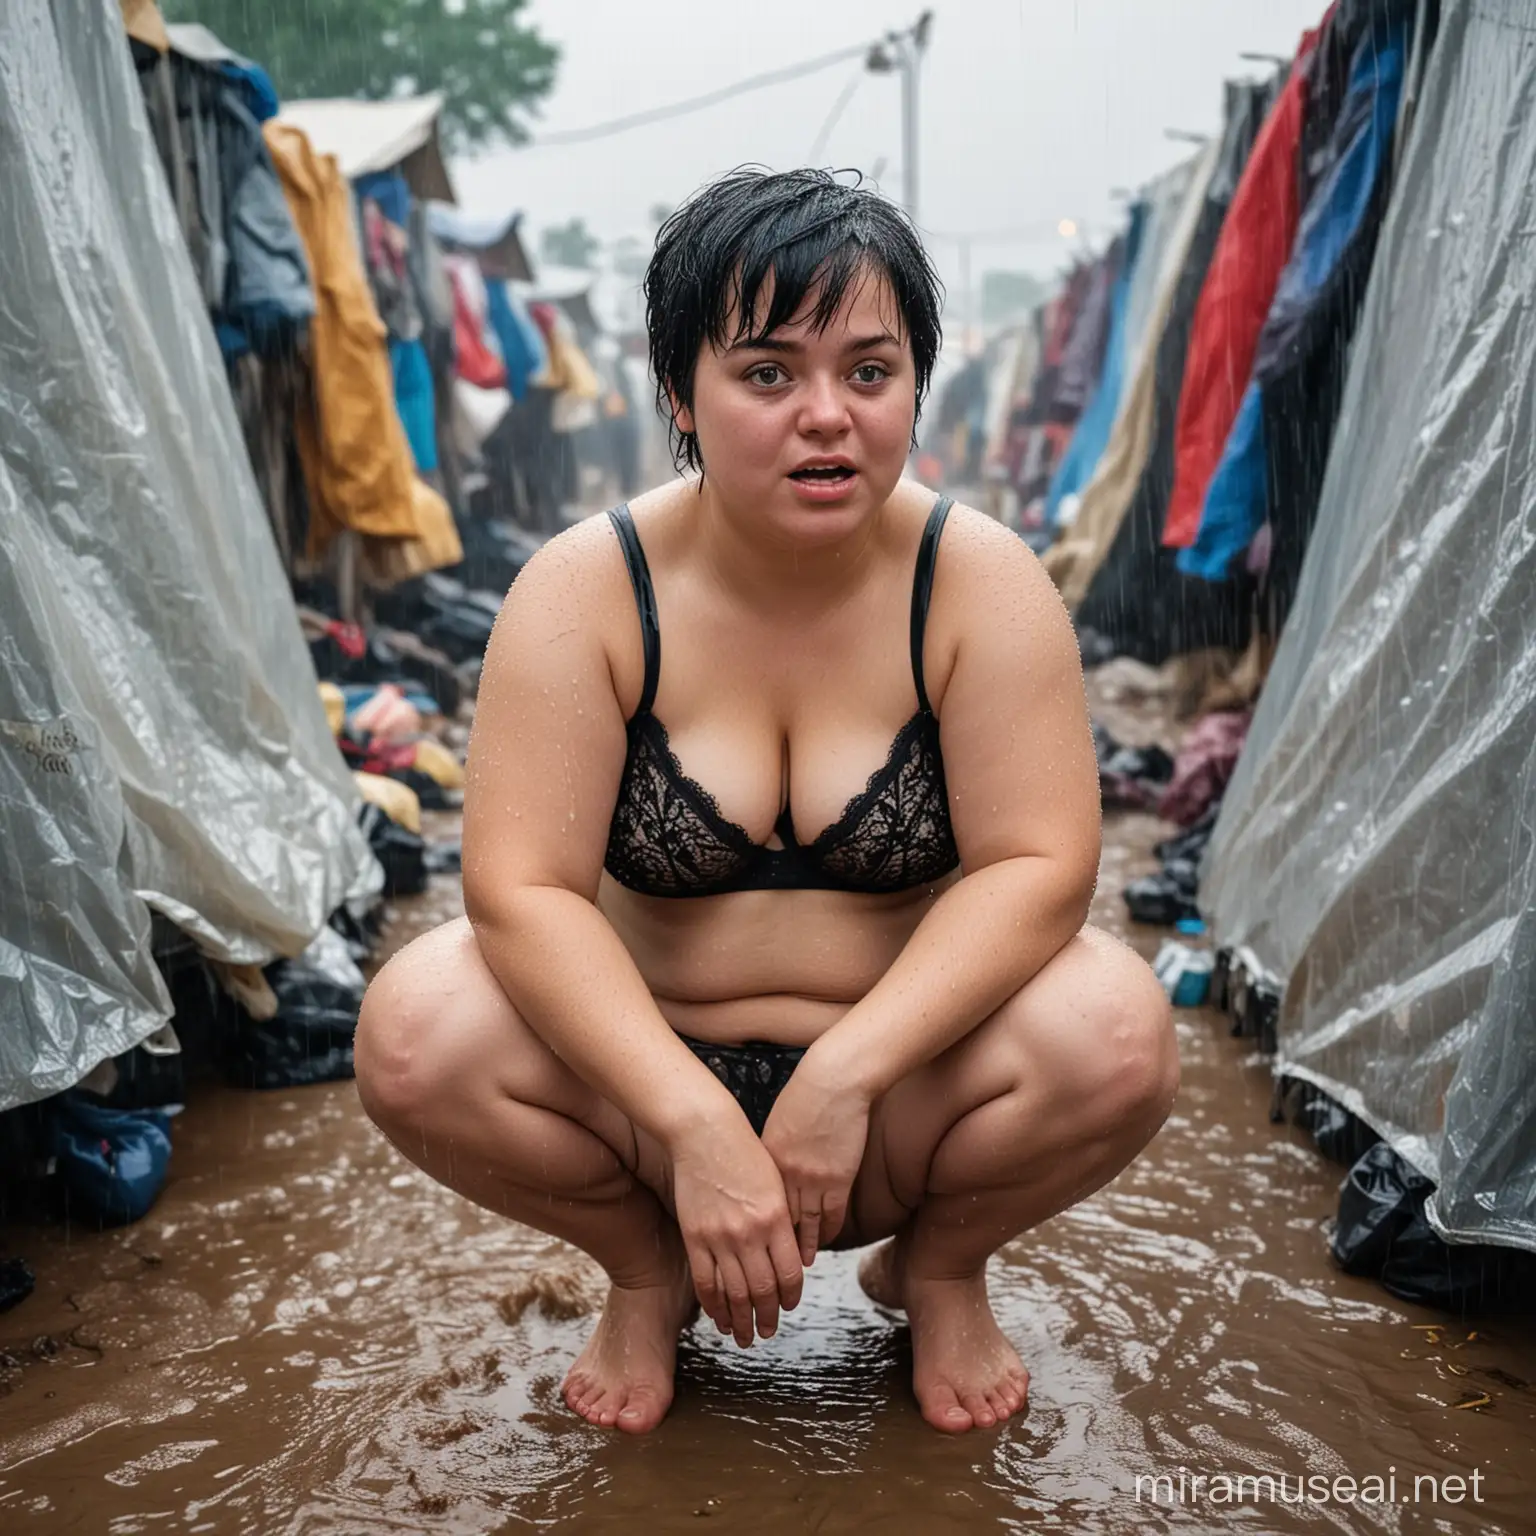 Chubby Woman with Down Syndrome in a Crowded Refugee Camp in the Rain